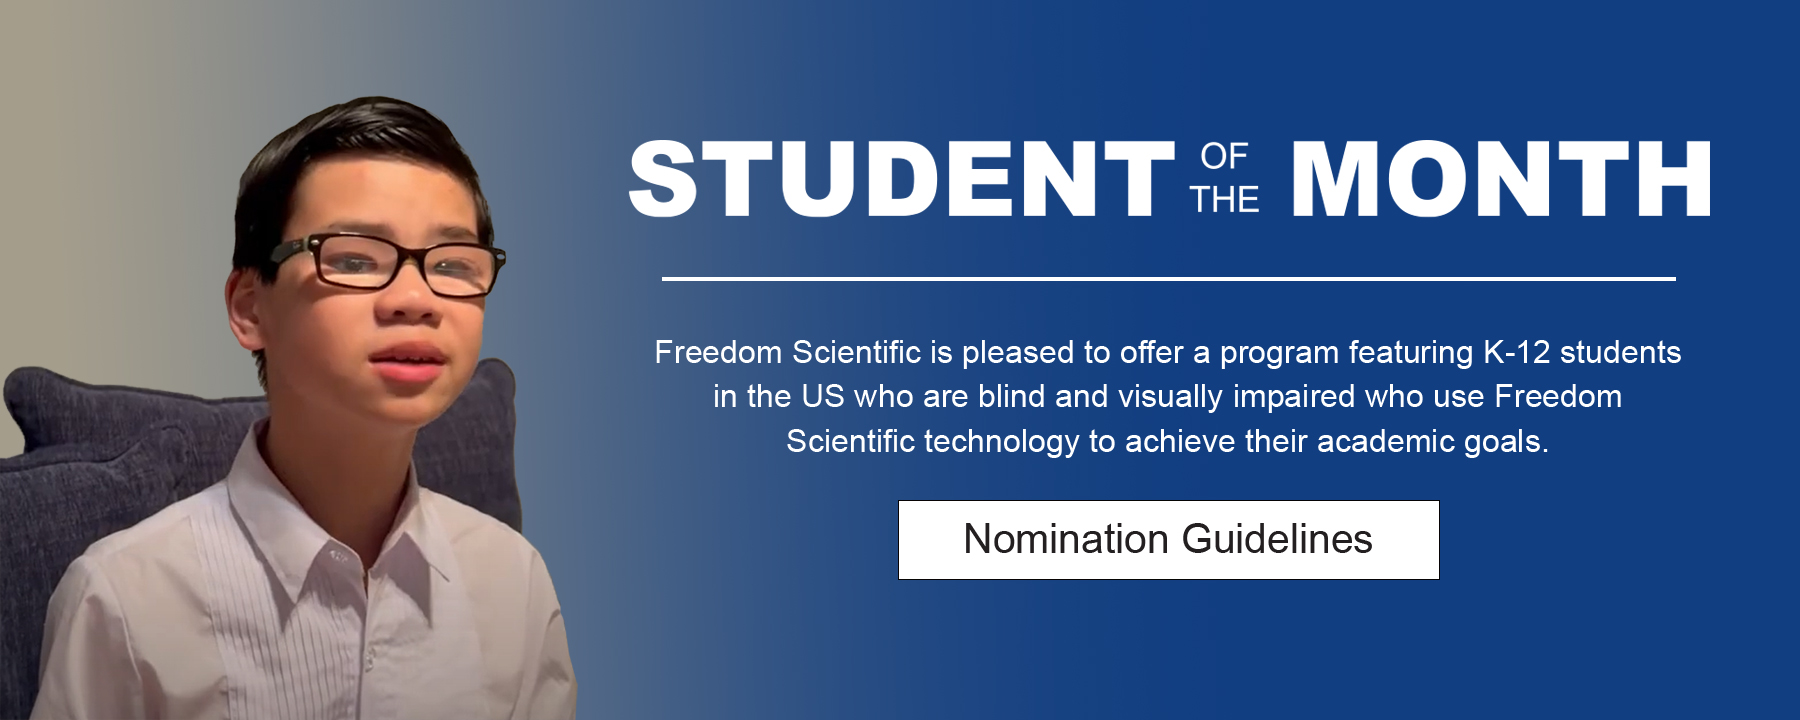 Freedom Scientific is pleased to offer a program featuring K-12 students in the US who are blind and visually impaired who use Freedom Scientific technology to achieve their academic goals.